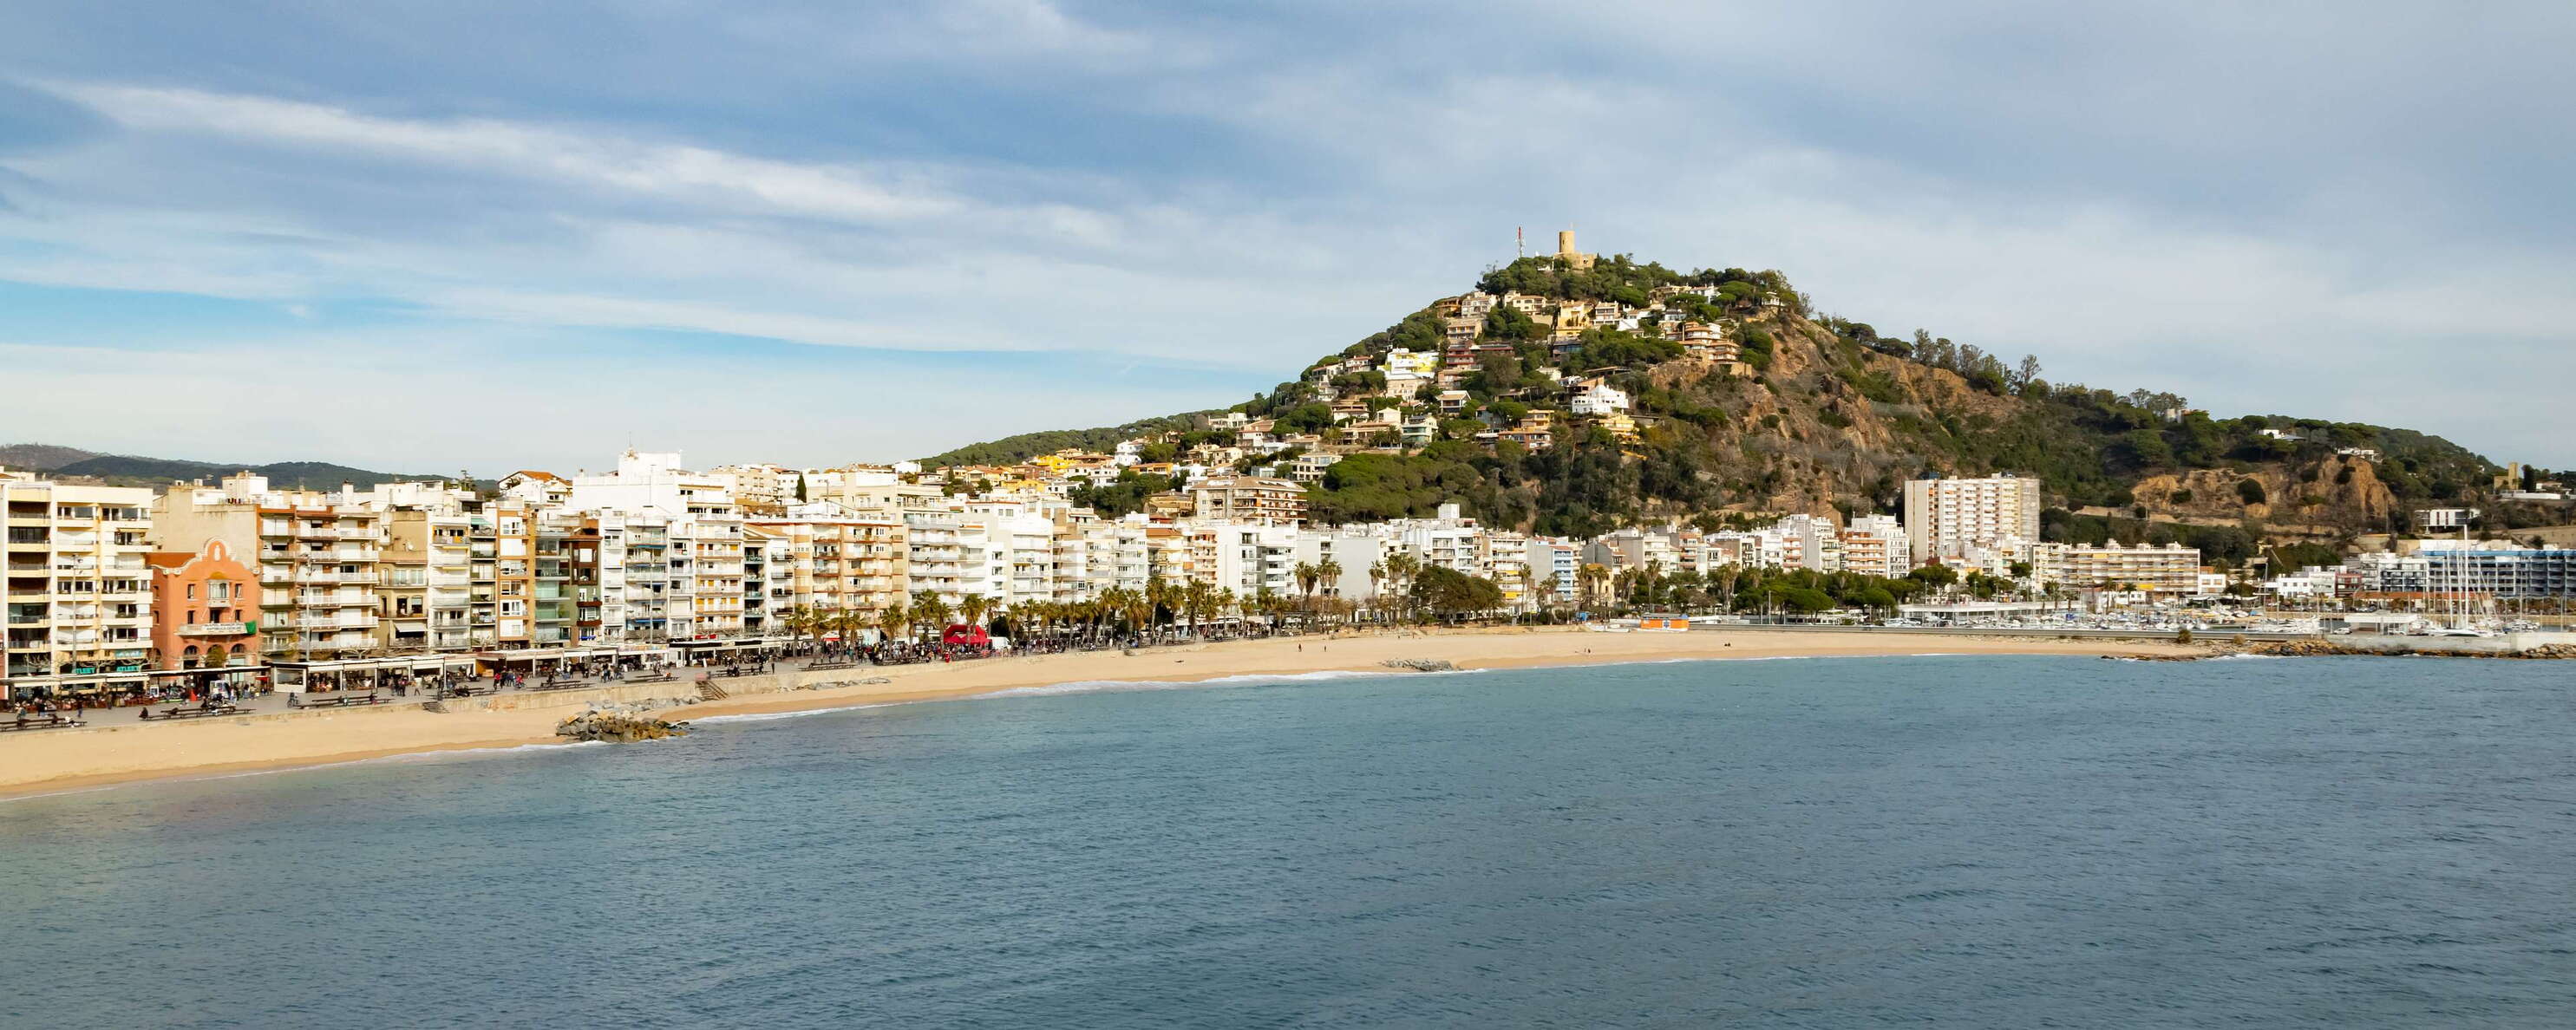 Blanes with beach and Turó de Sant Joan